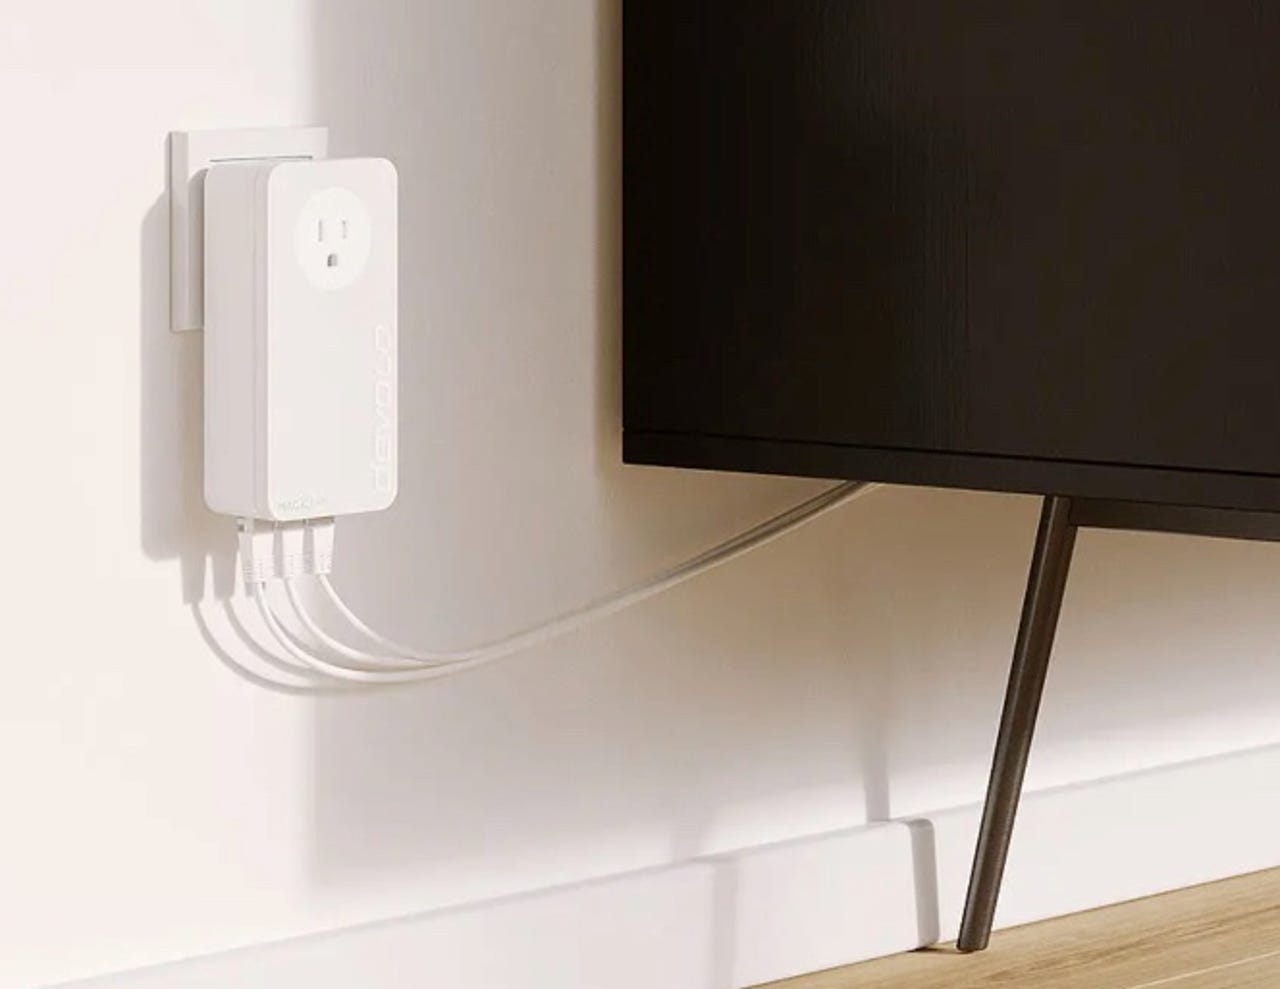 How to convert your home's old TV cable into powerful Ethernet lines